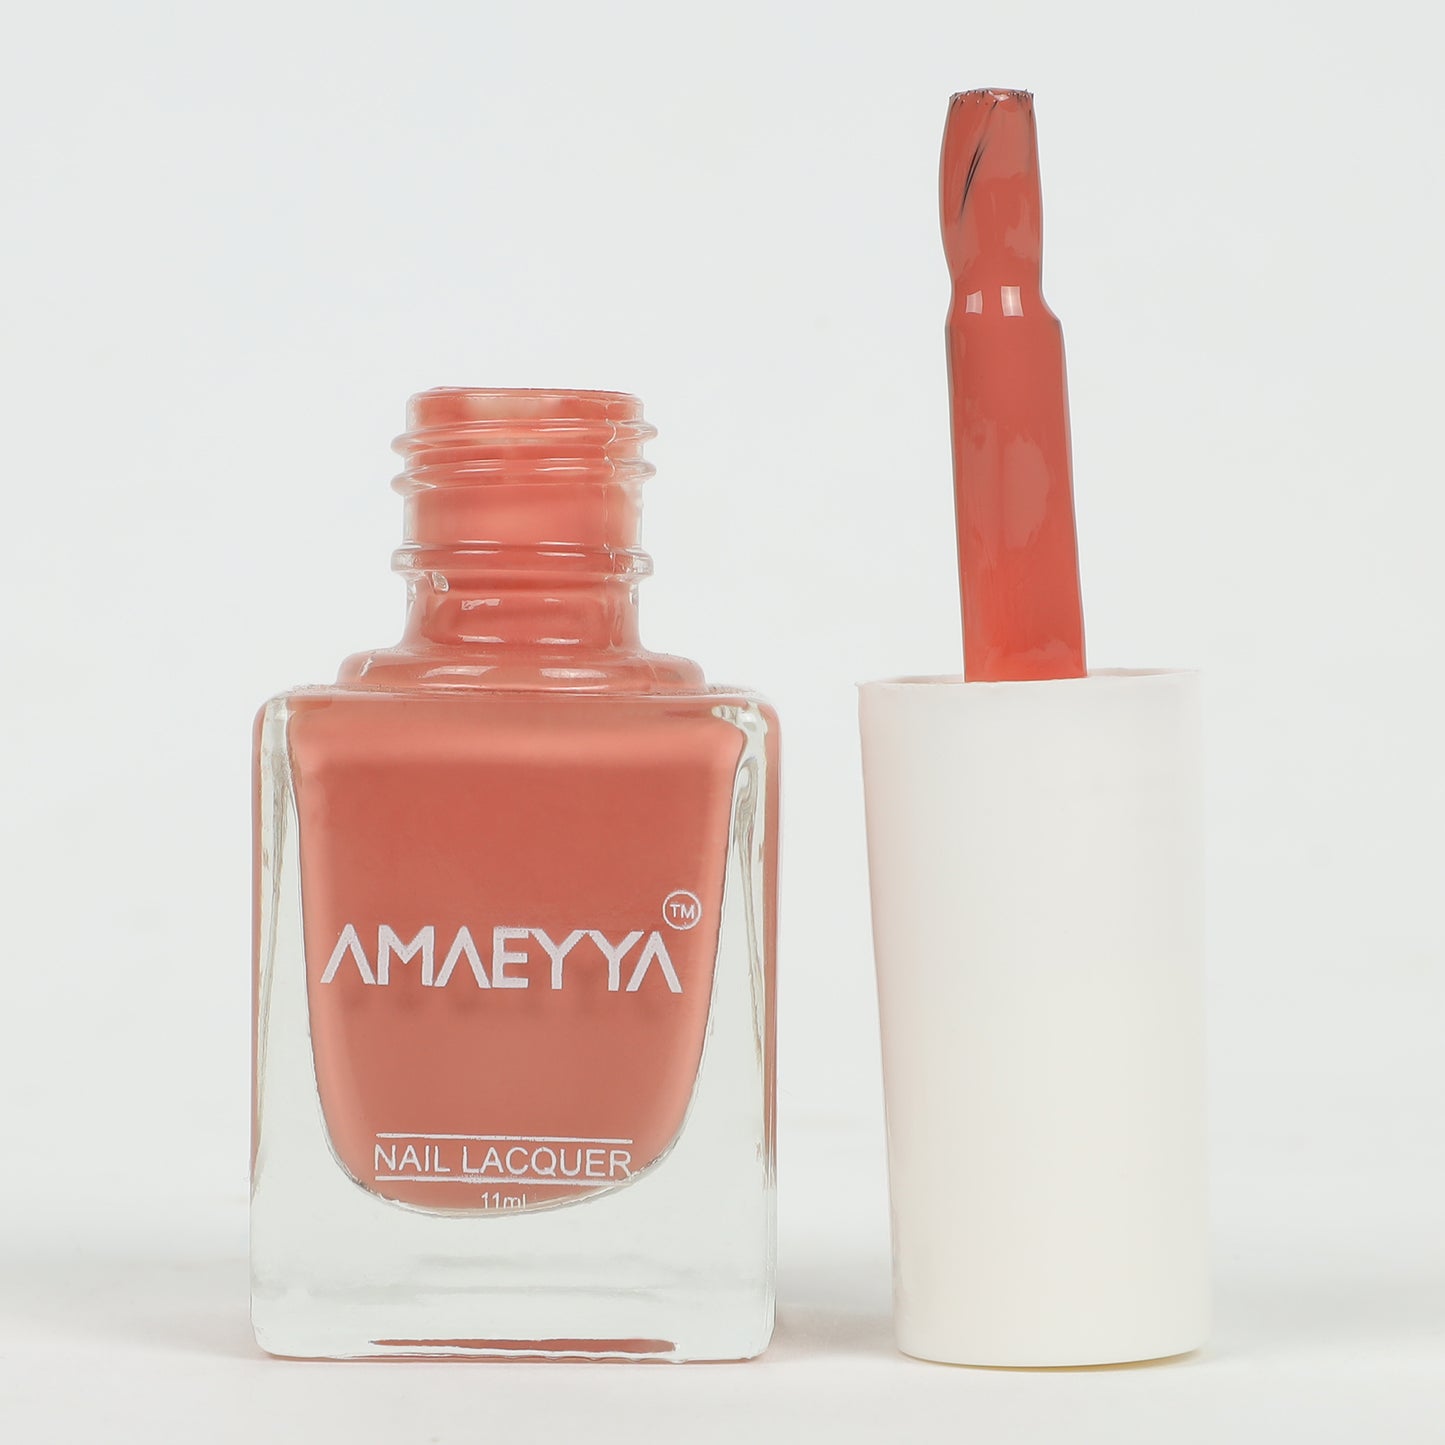 AMAEYYA SIMPLY NUDE Nail Lacquer